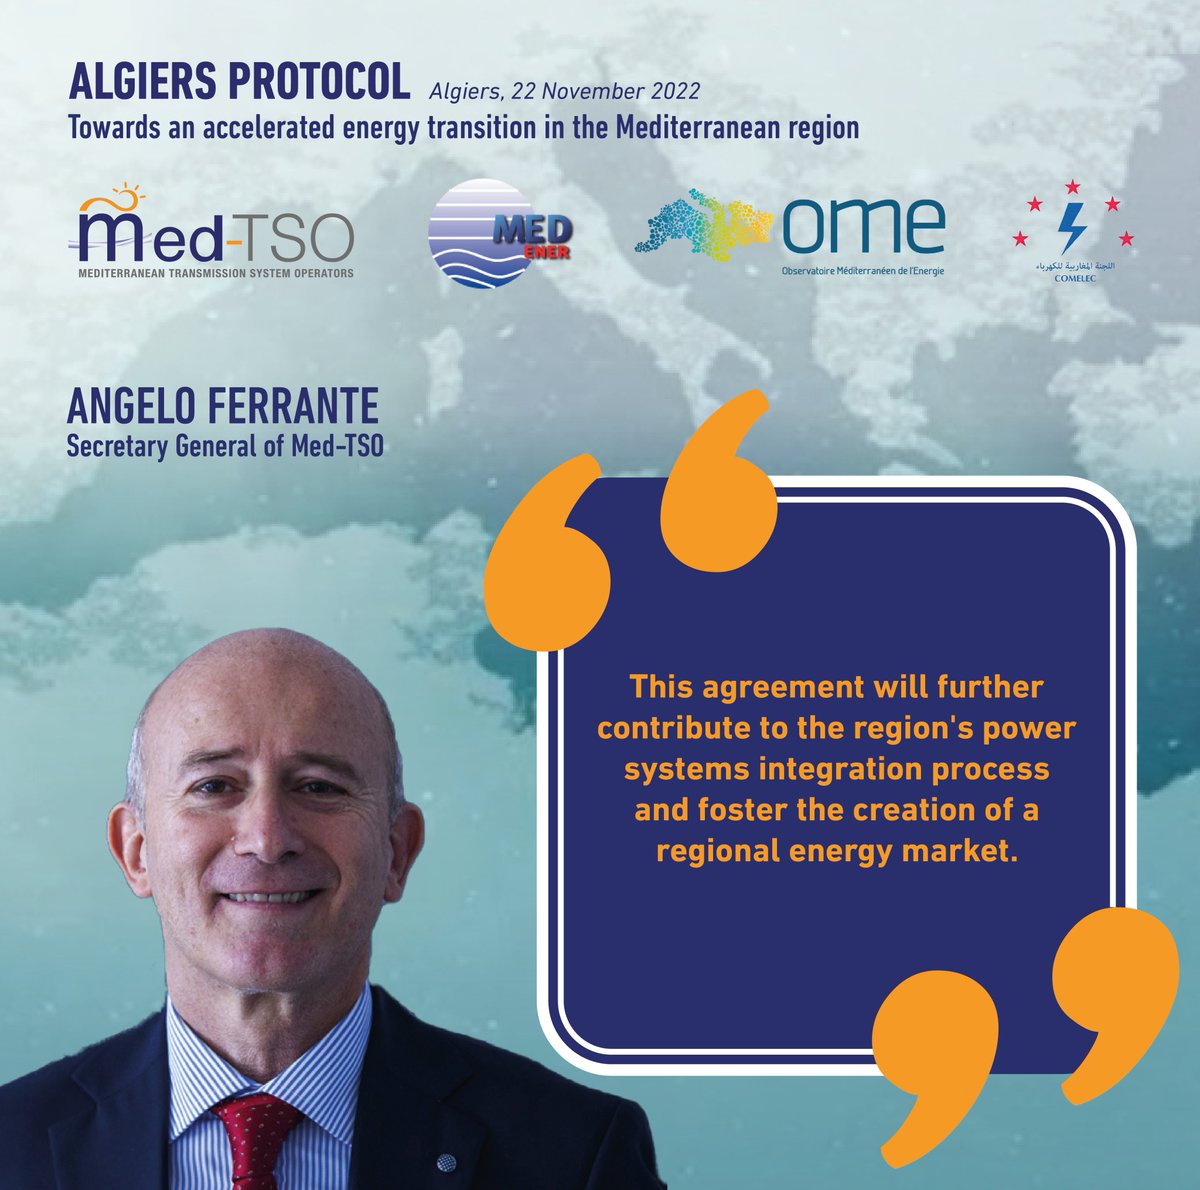 Capacity building, events, studies and joint projects are among the key actions #MedTSO will implement with #COMELEC, @ContactMedener and @OME_cooperation to favour the #Mediterraneanenergy integration process. 
Read the words of our Secretary General Angelo Ferrante.